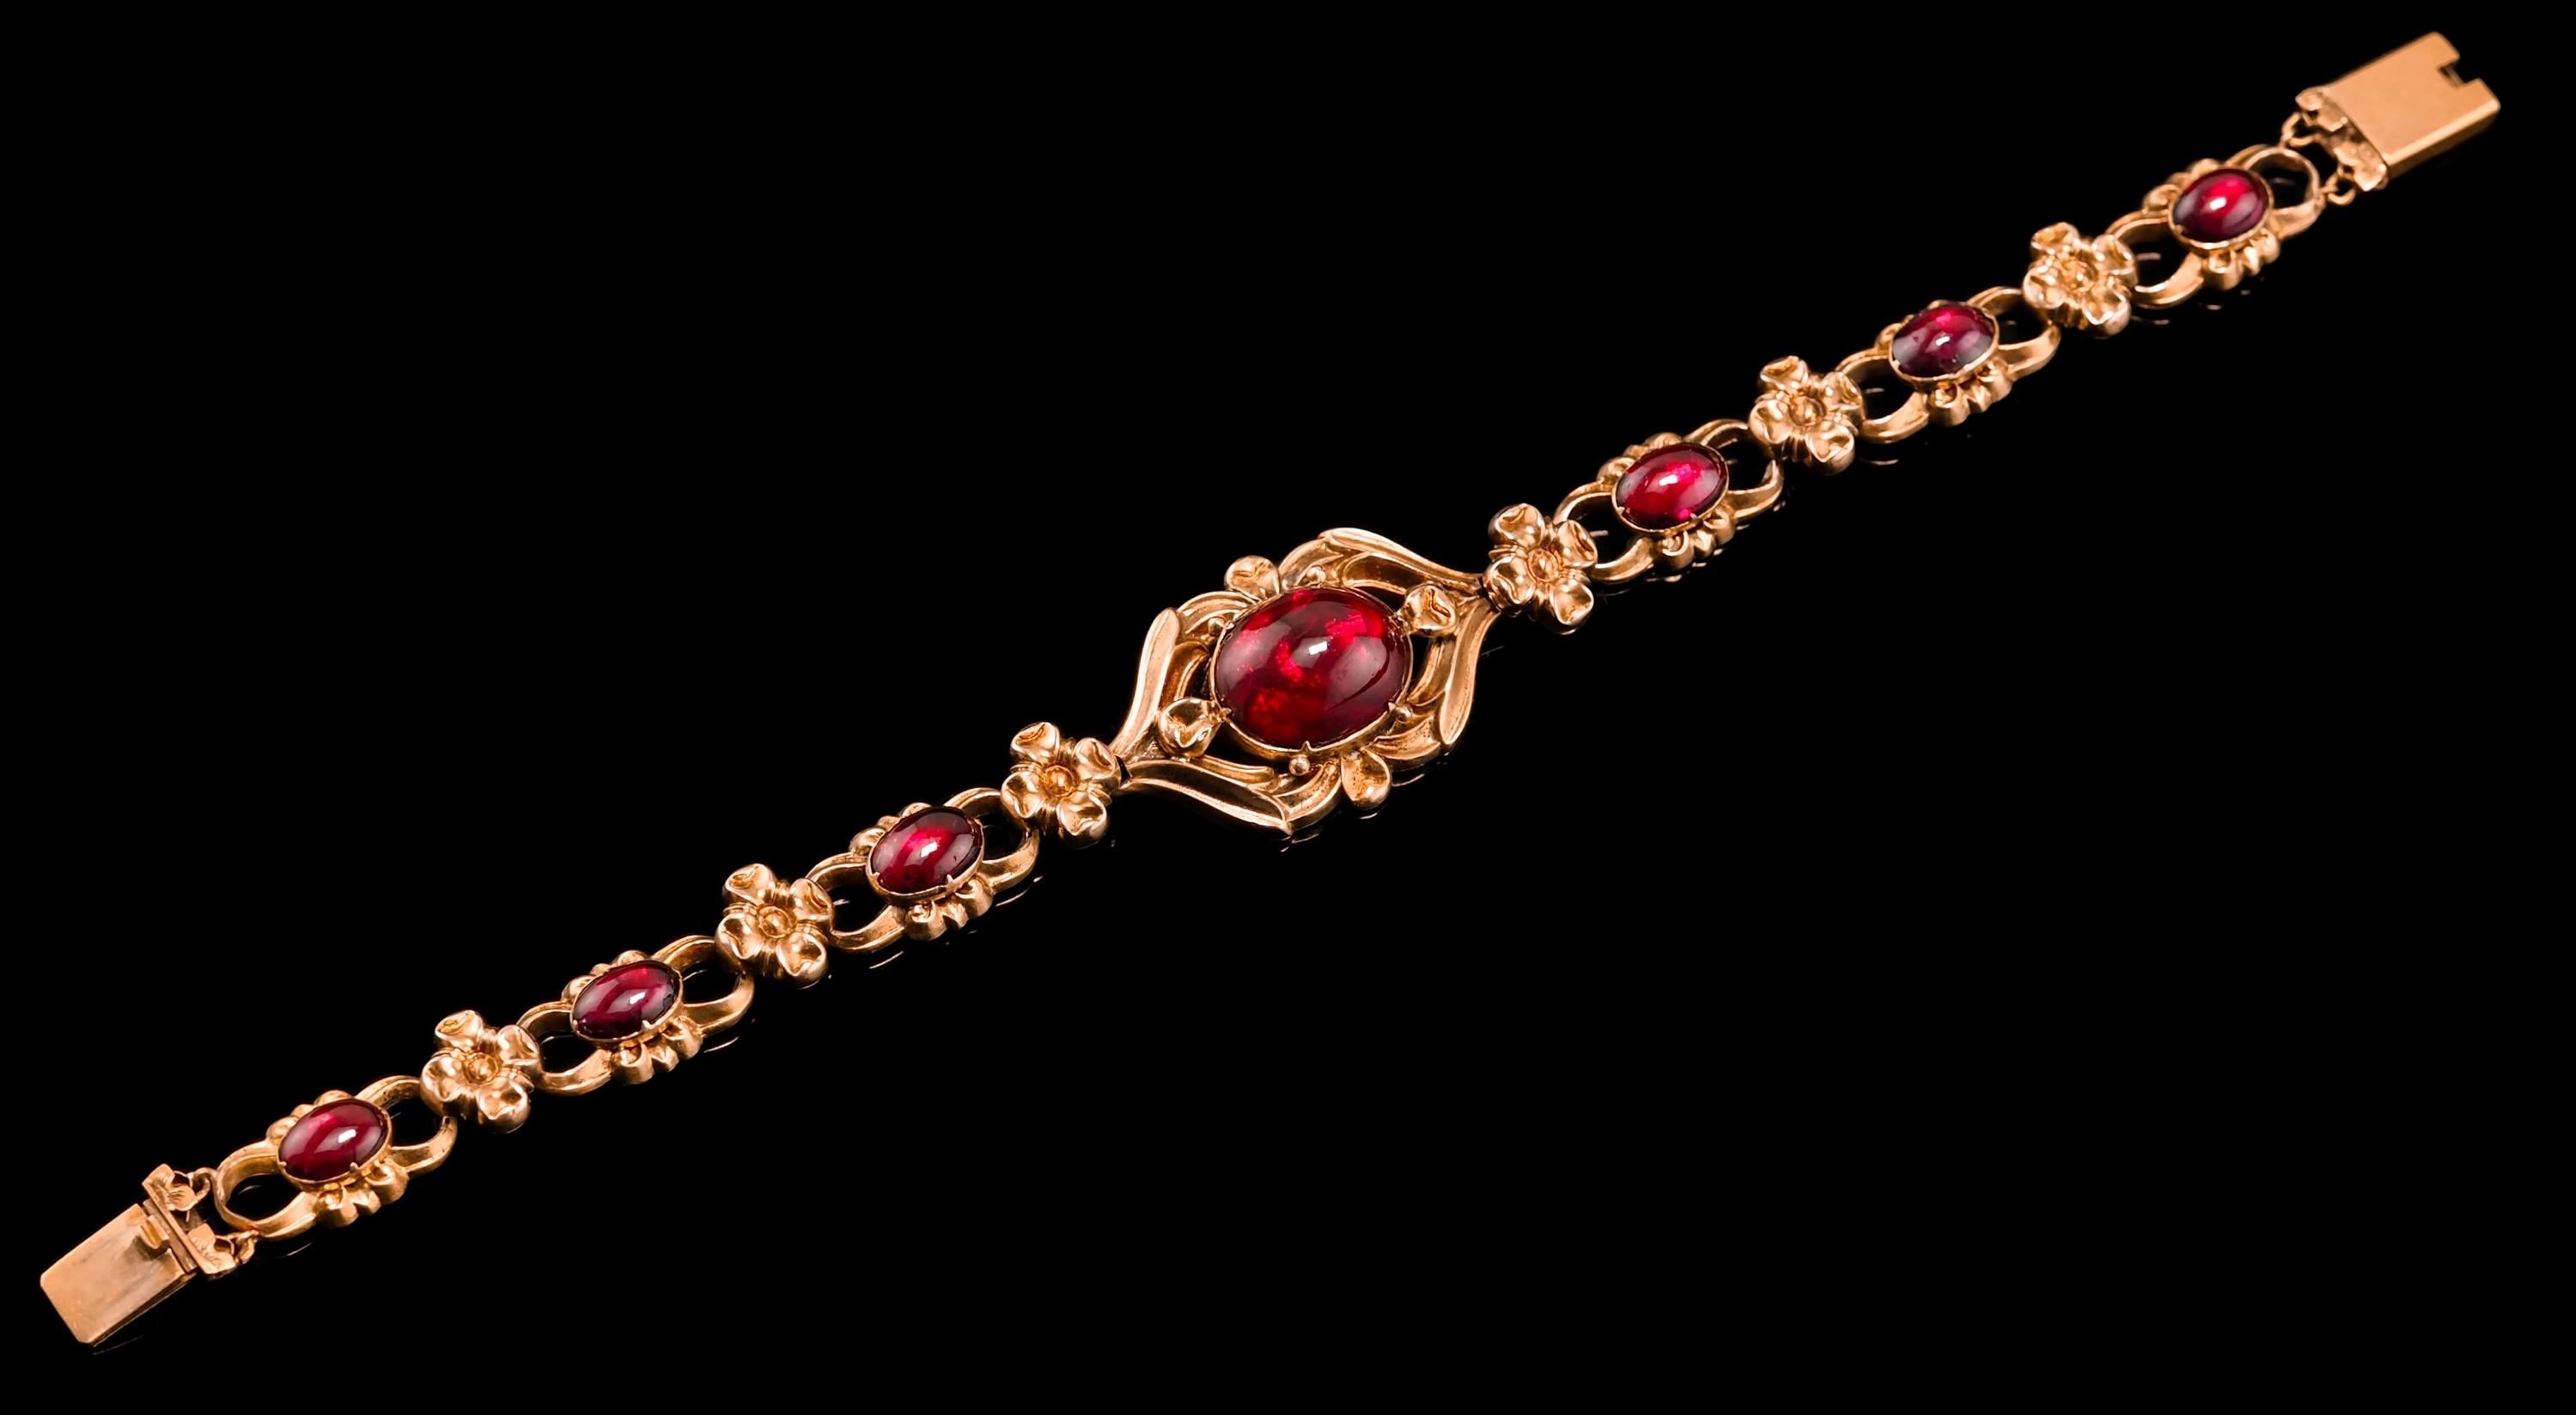 We are delighted to offer this magnificent 18ct gold garnet bracelet made in the early Victorian period c.1840.
   
This beautiful floral-themed bracelet is made from high-carat gold (18ct+ tested). It presents a gorgeous and majestic design